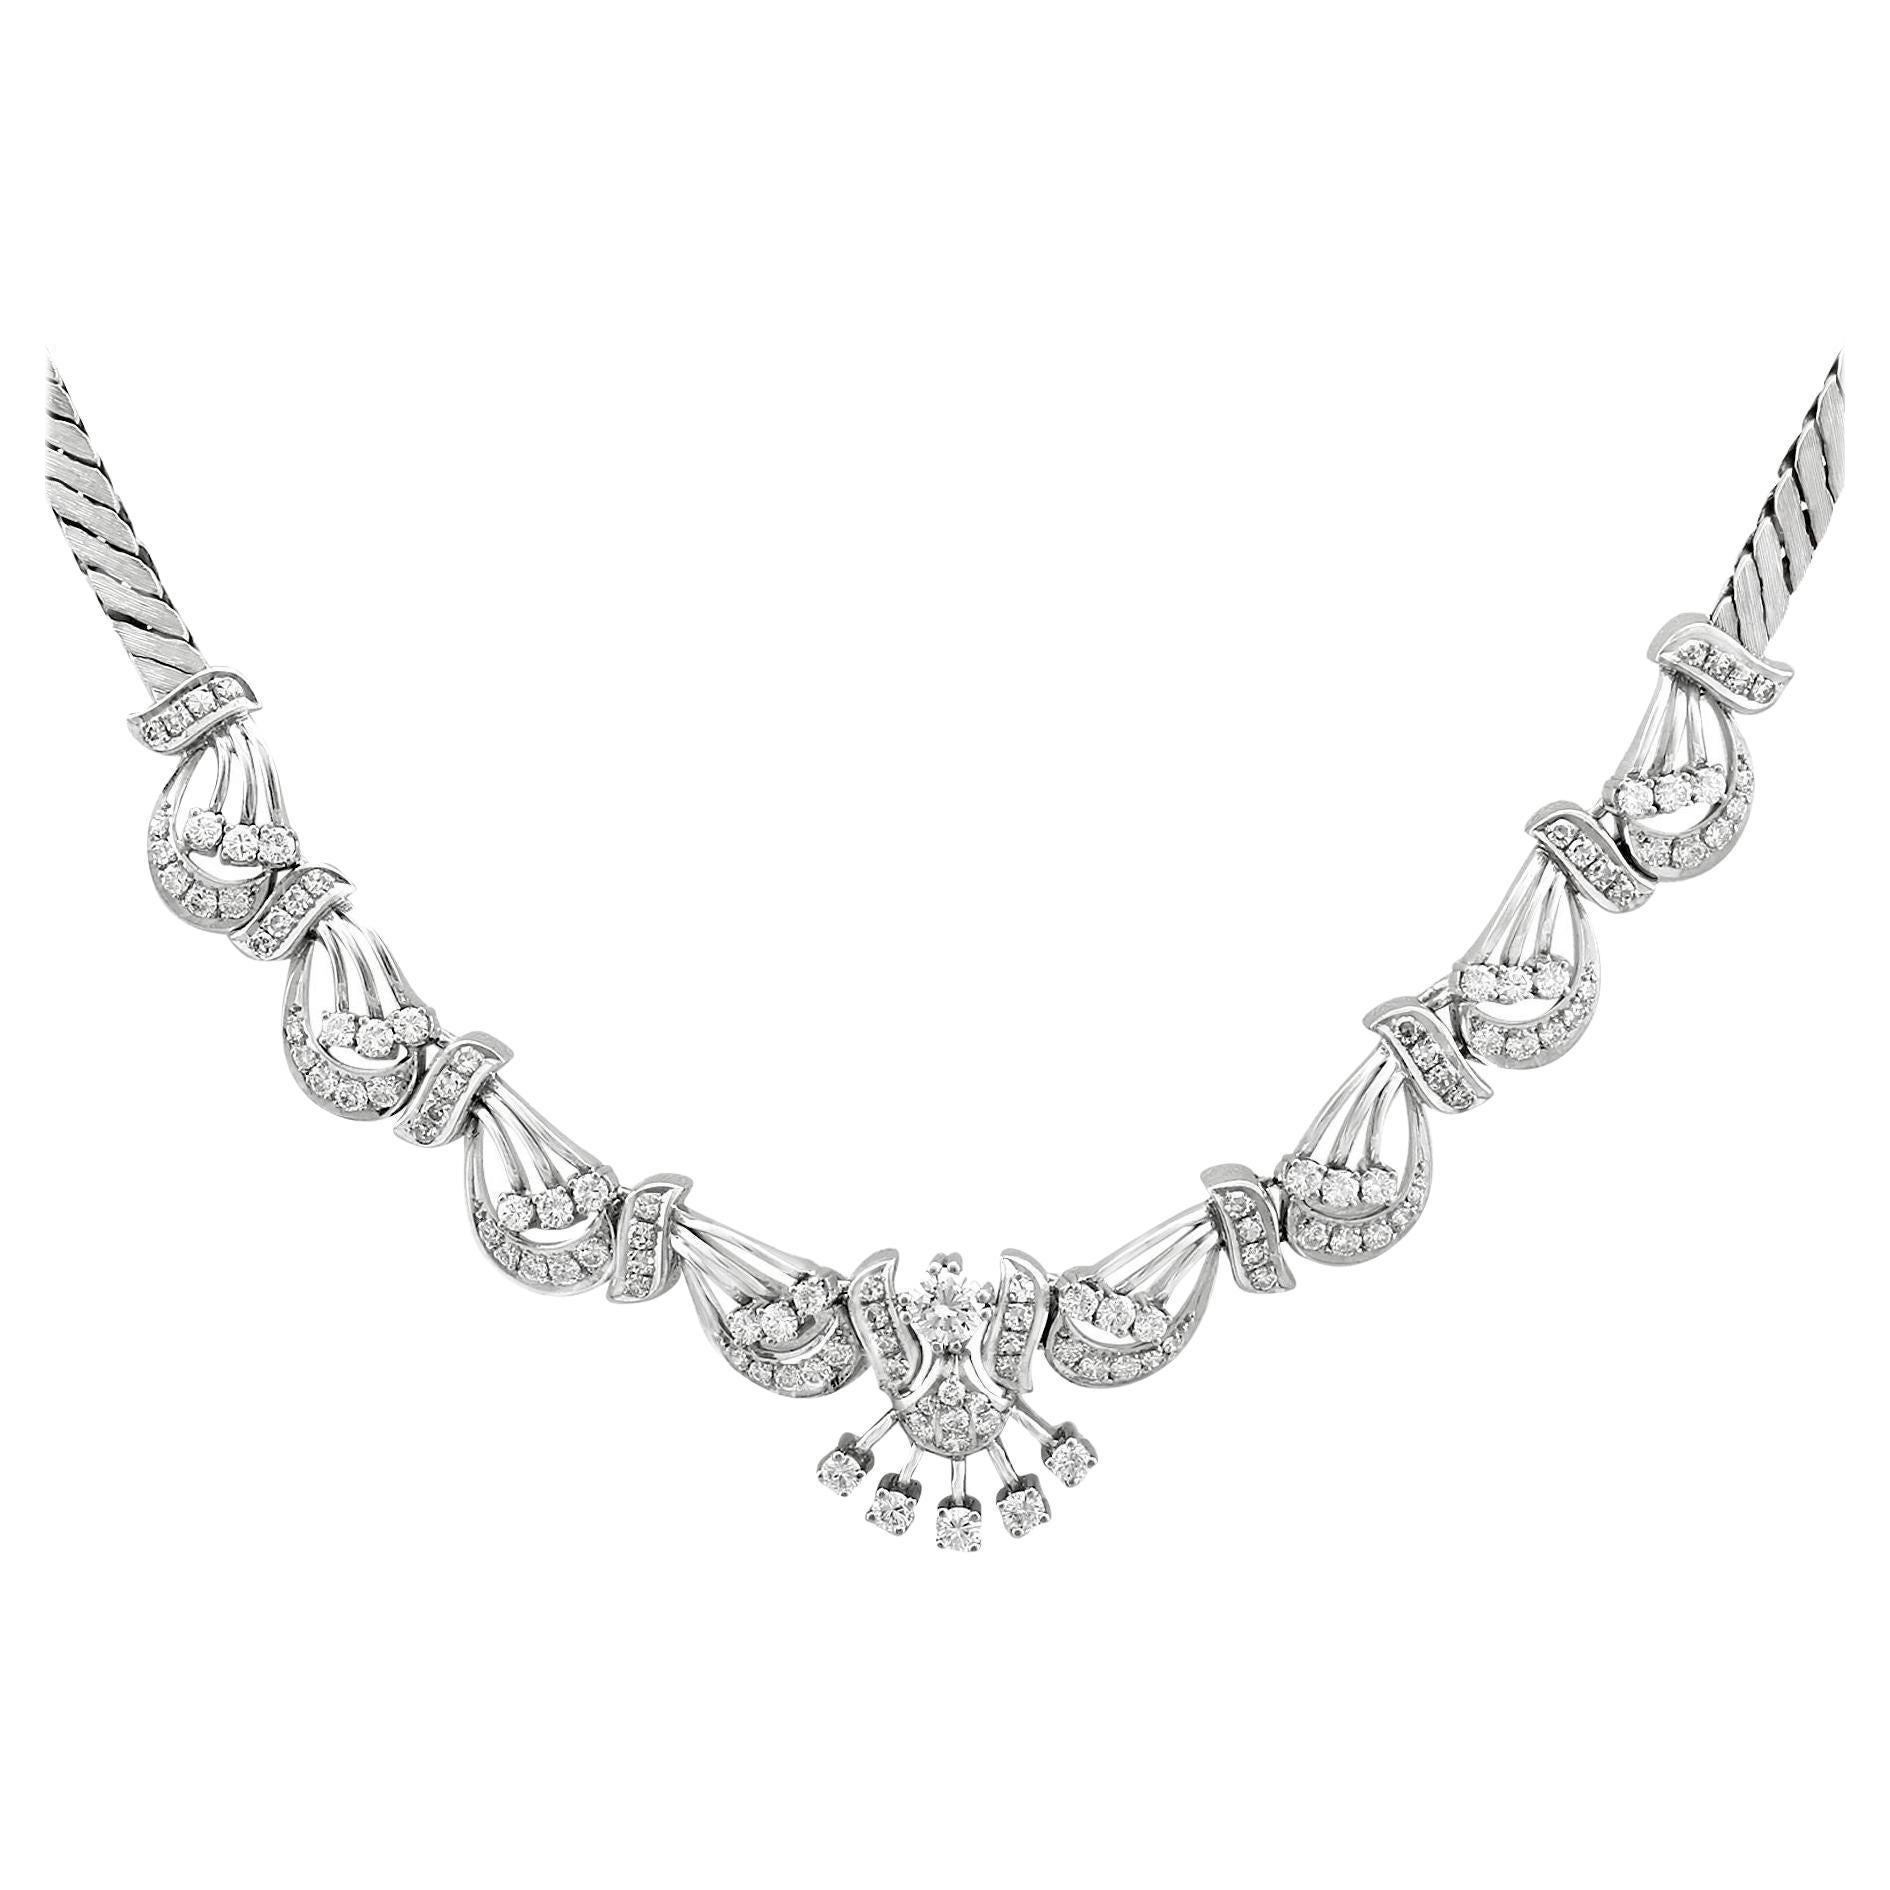 1960s Vintage 5.57 Carat Diamond and White Gold Necklace